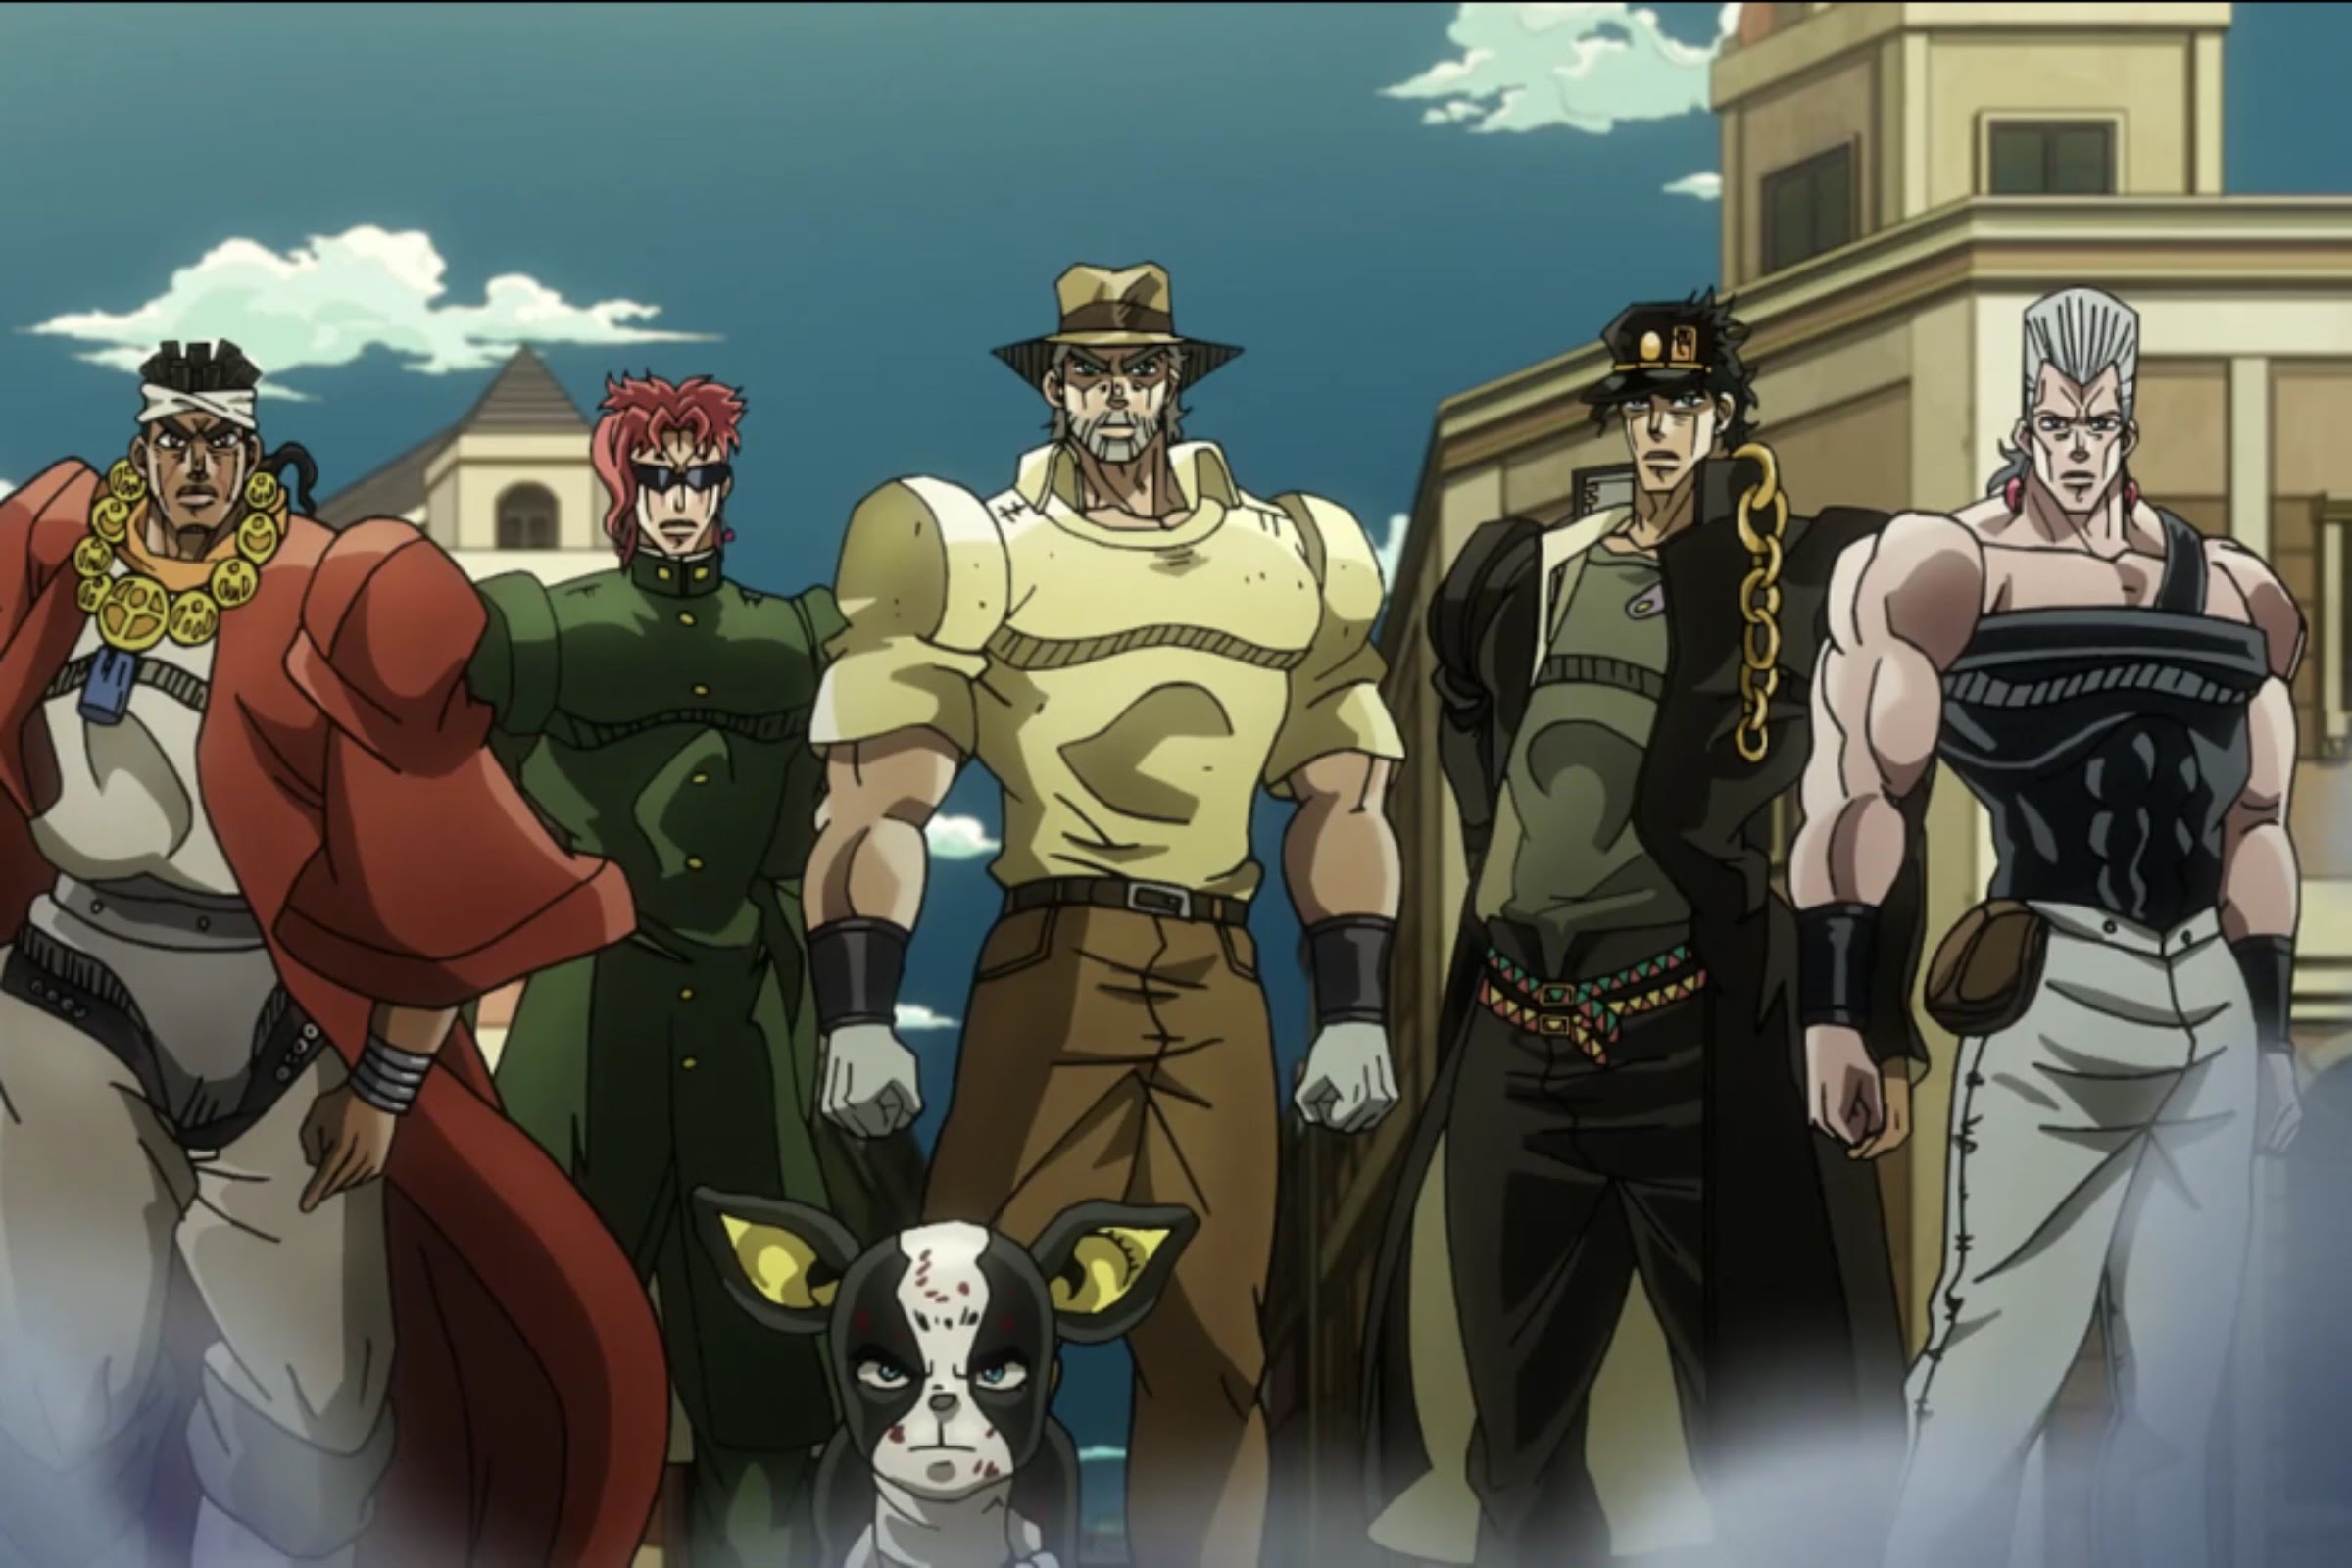 Stardust Crusaders #39 - The Guardian of Hell, Pet Shop - Part 2